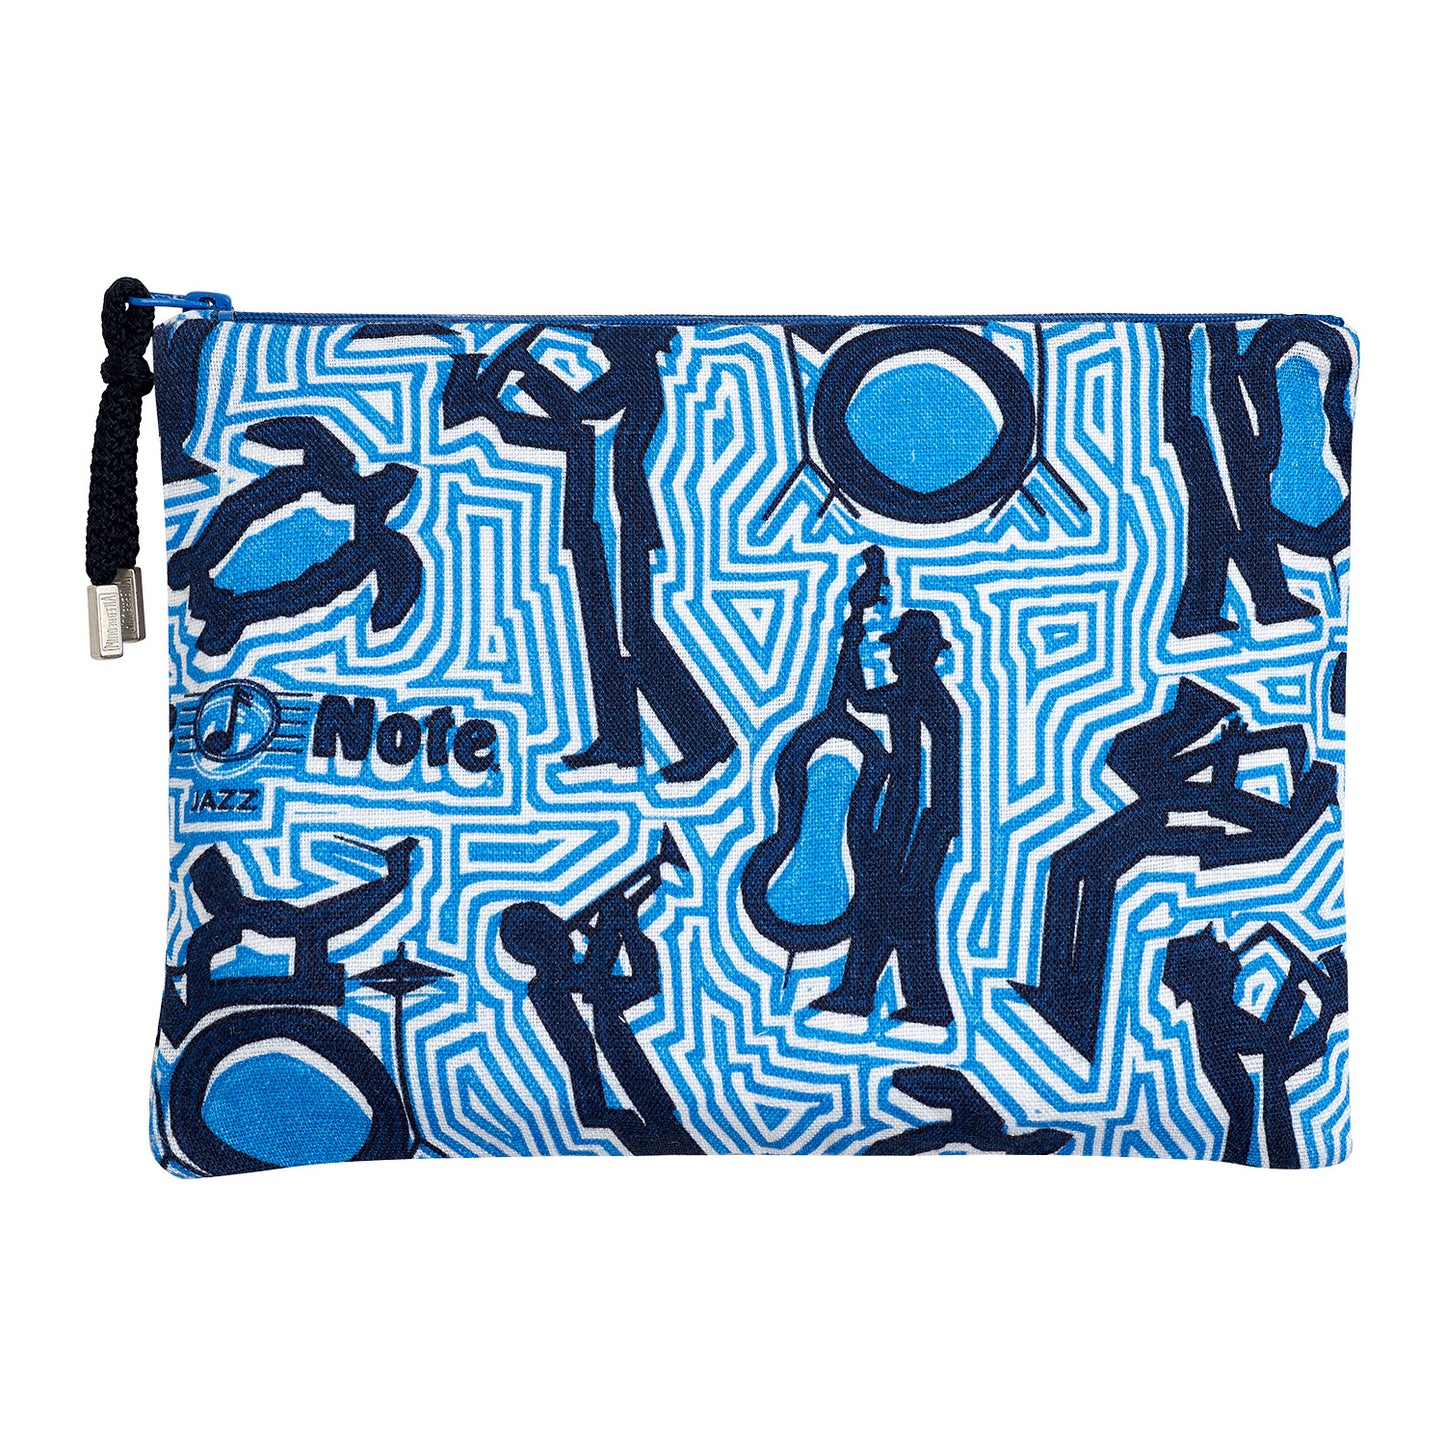 Vilebrequin x Blue Note Printed Linen Packmax Pouch